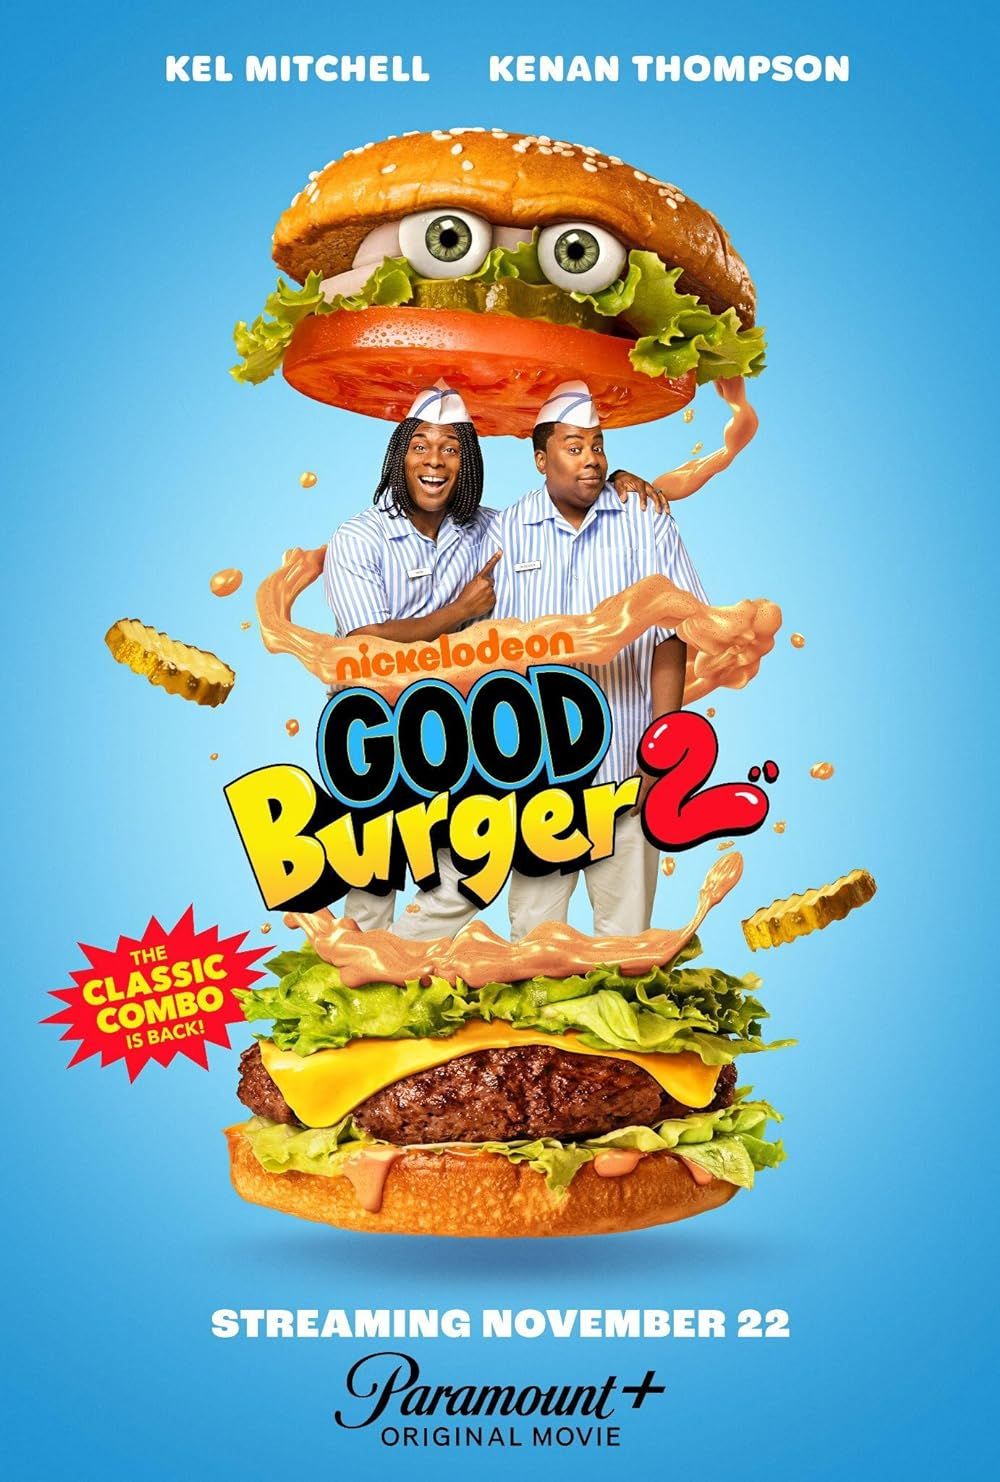 The poster for Good Burger 2